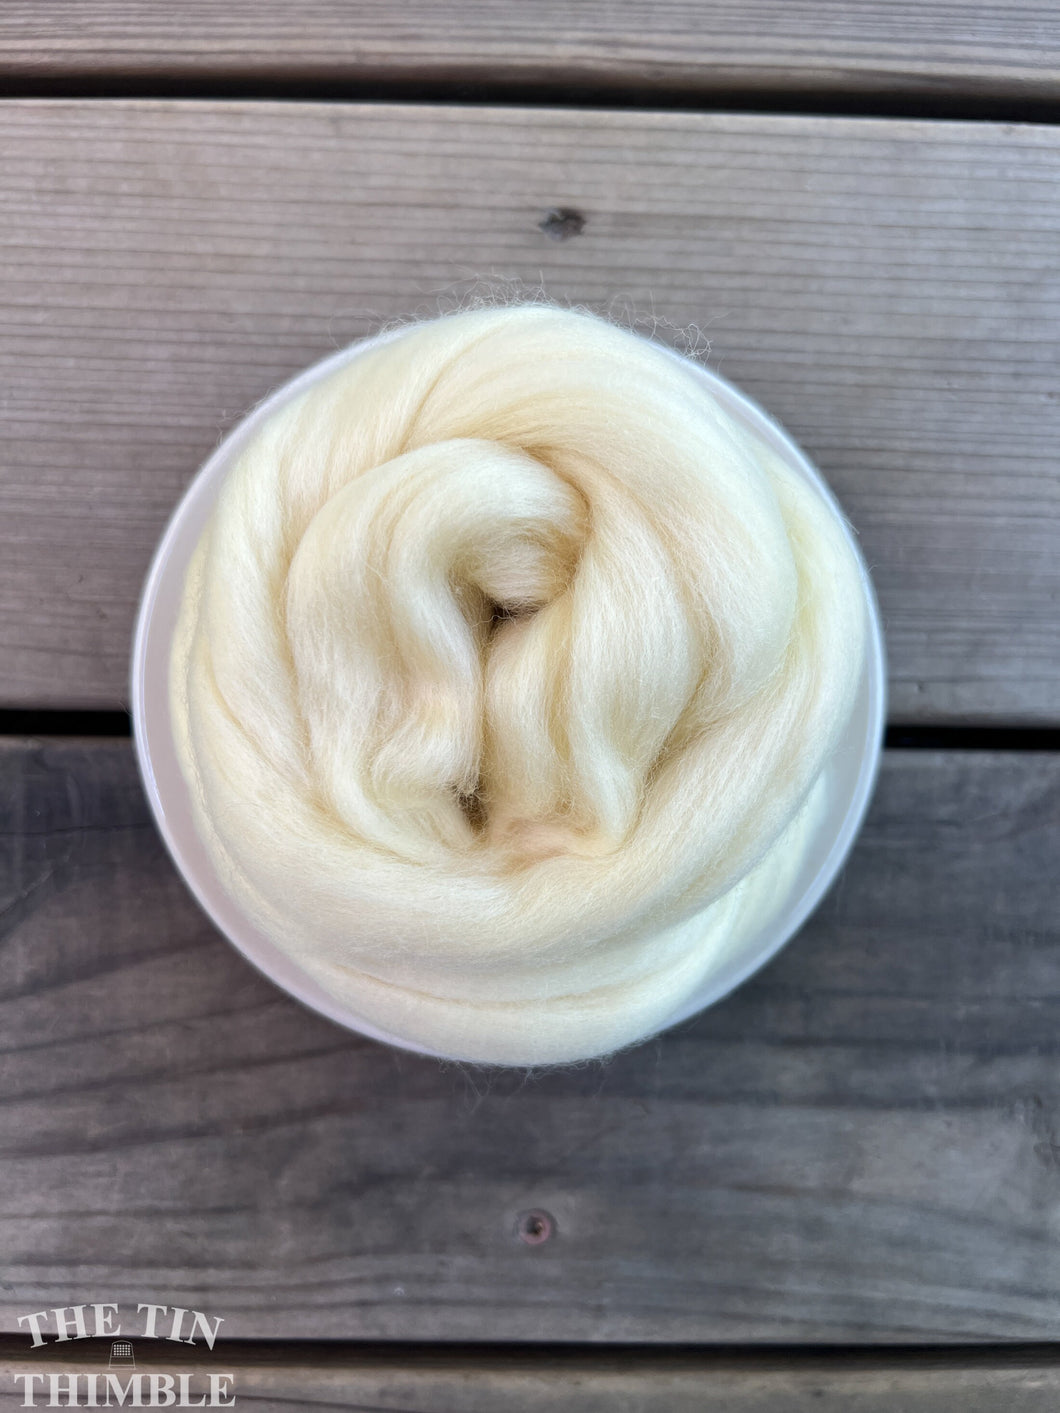 Champagne White Superfine Merino Wool Roving - 1 oz - Superfine Roving for Felting, Weaving, Spinning and More